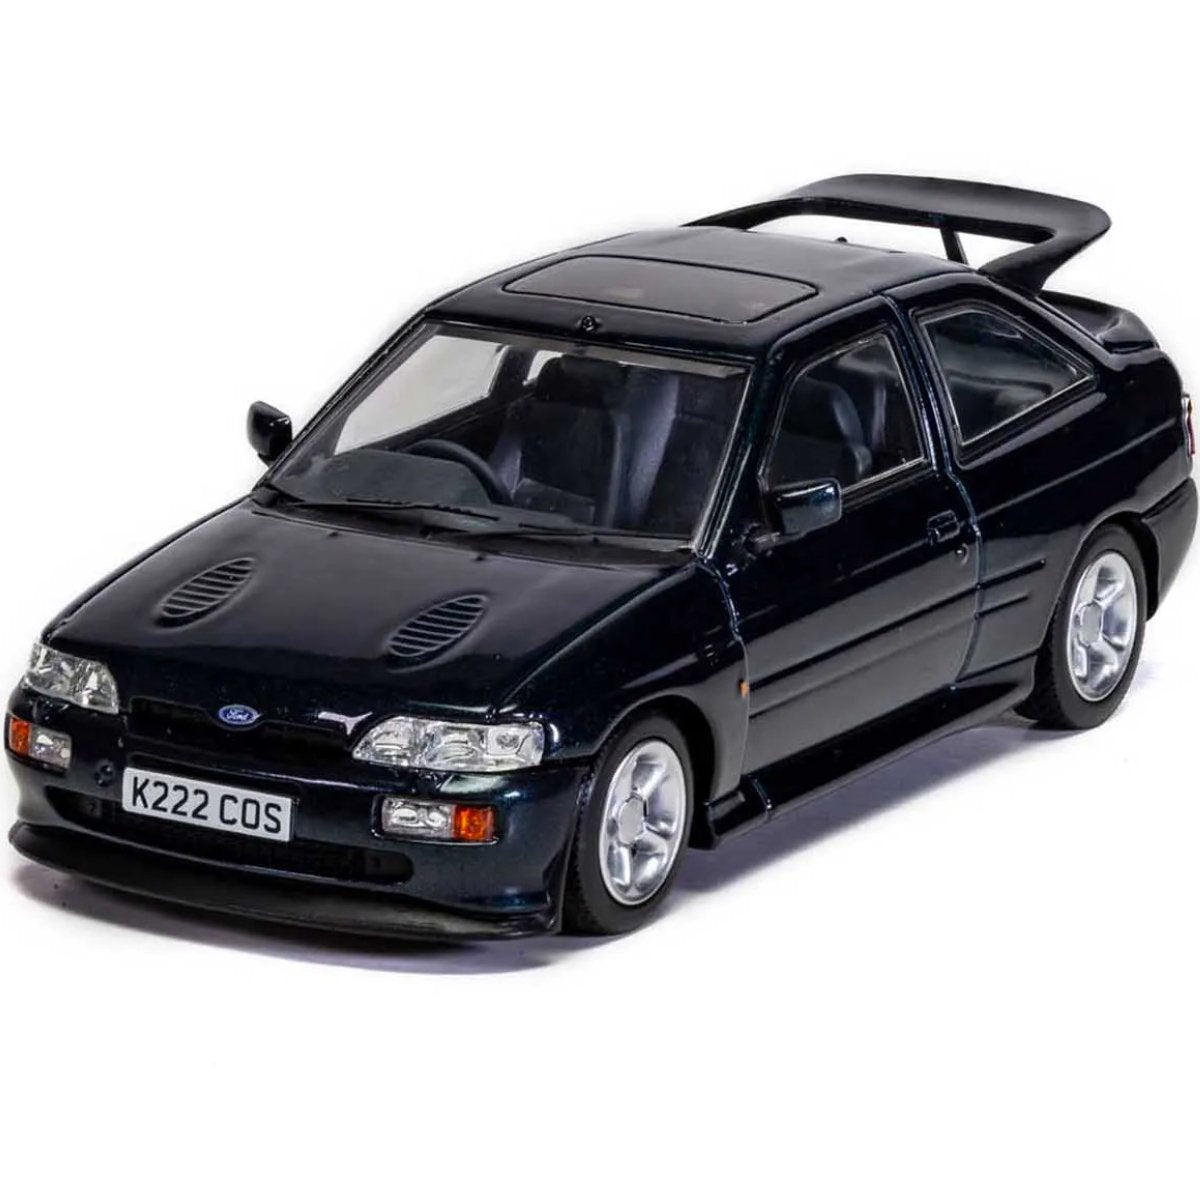 Corgi CW00001 Ford RS Cosworth Collection - Phillips Hobbies